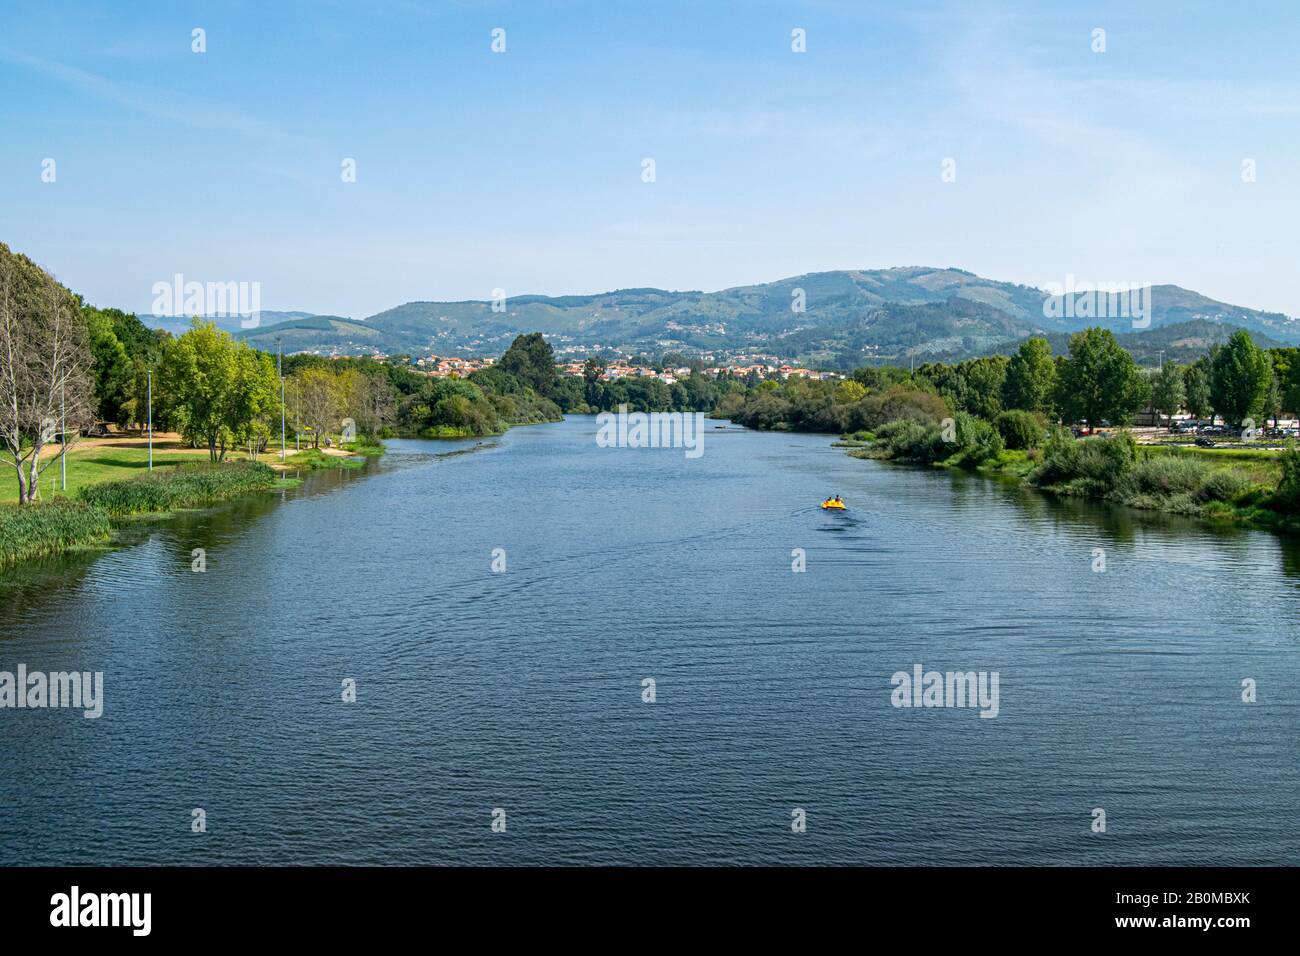 Ponte de lima river in Portugal landscape with pedaling boat passing, people enjoying nautical activities on summer. Ponte de Lima landscape view. Aereal Stock Photo